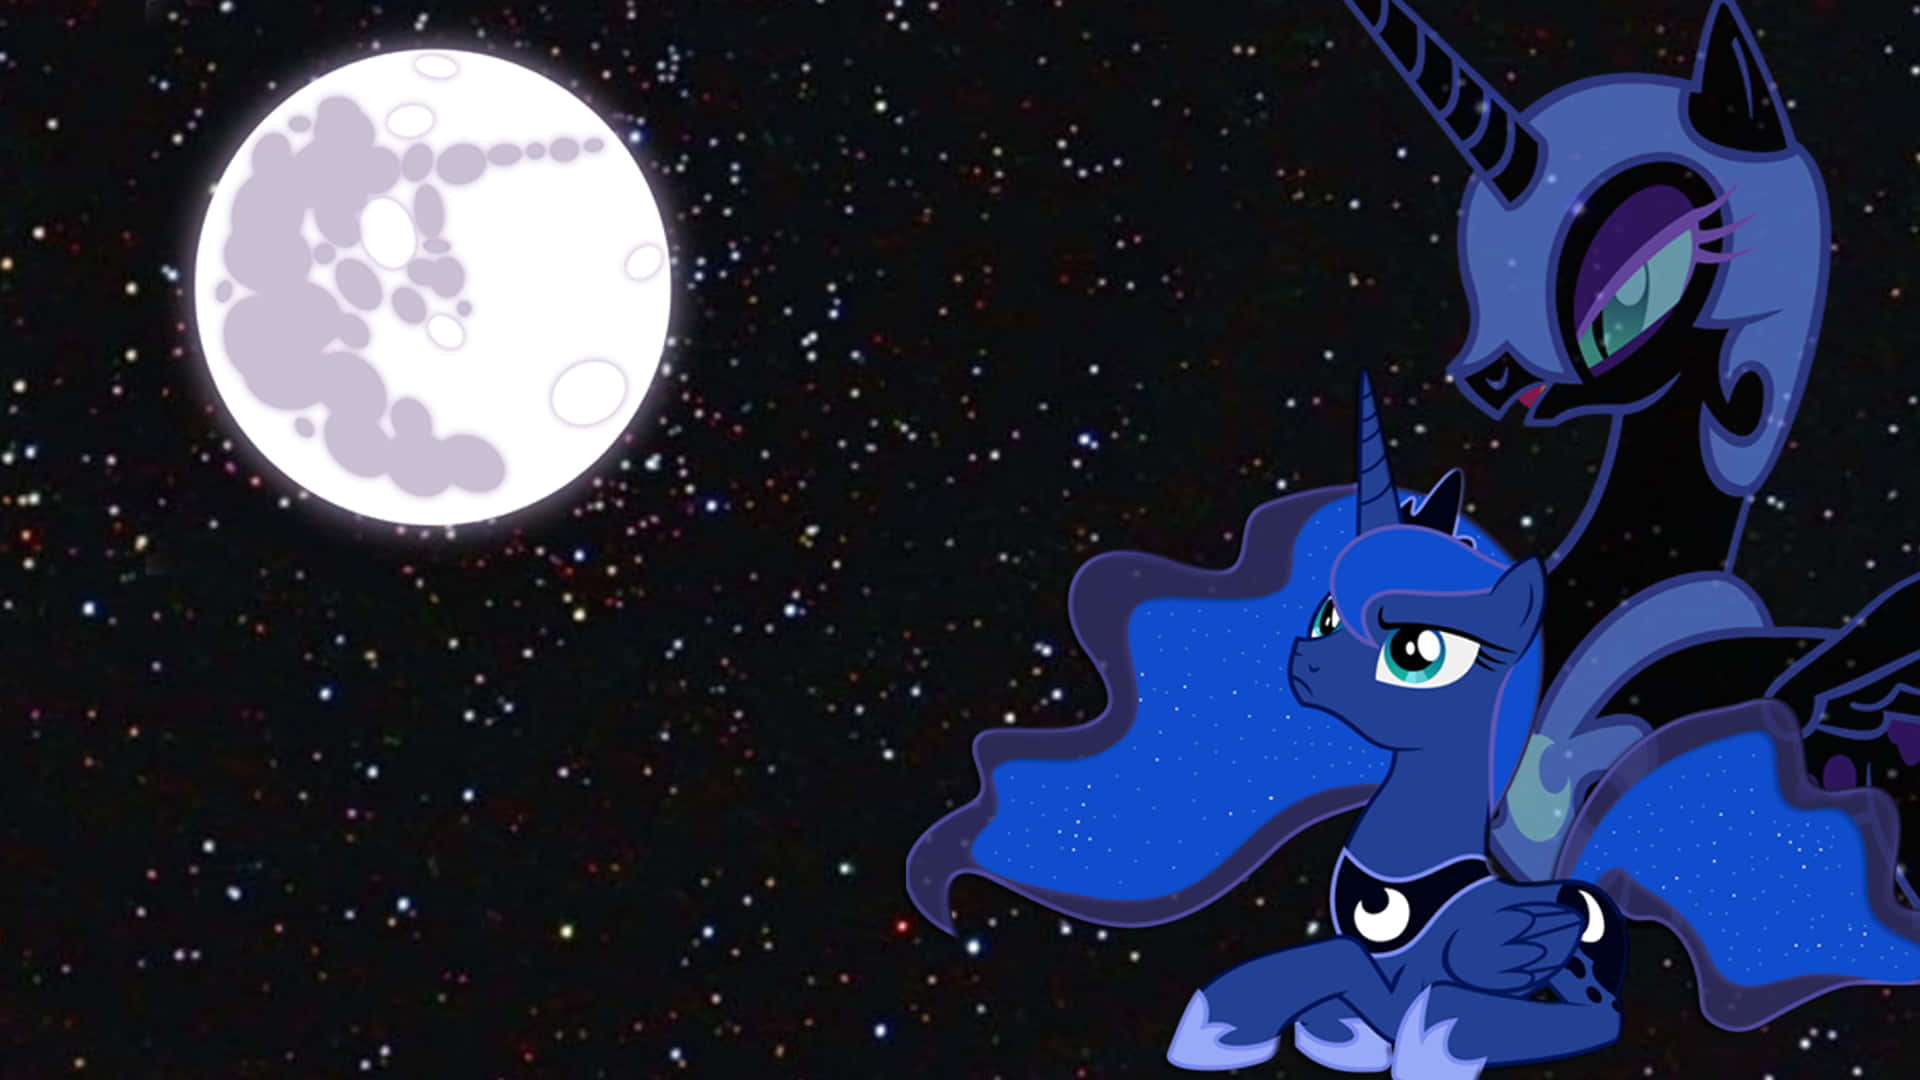 The Shadow of Nightmare Moon Looms Over Equestria Wallpaper